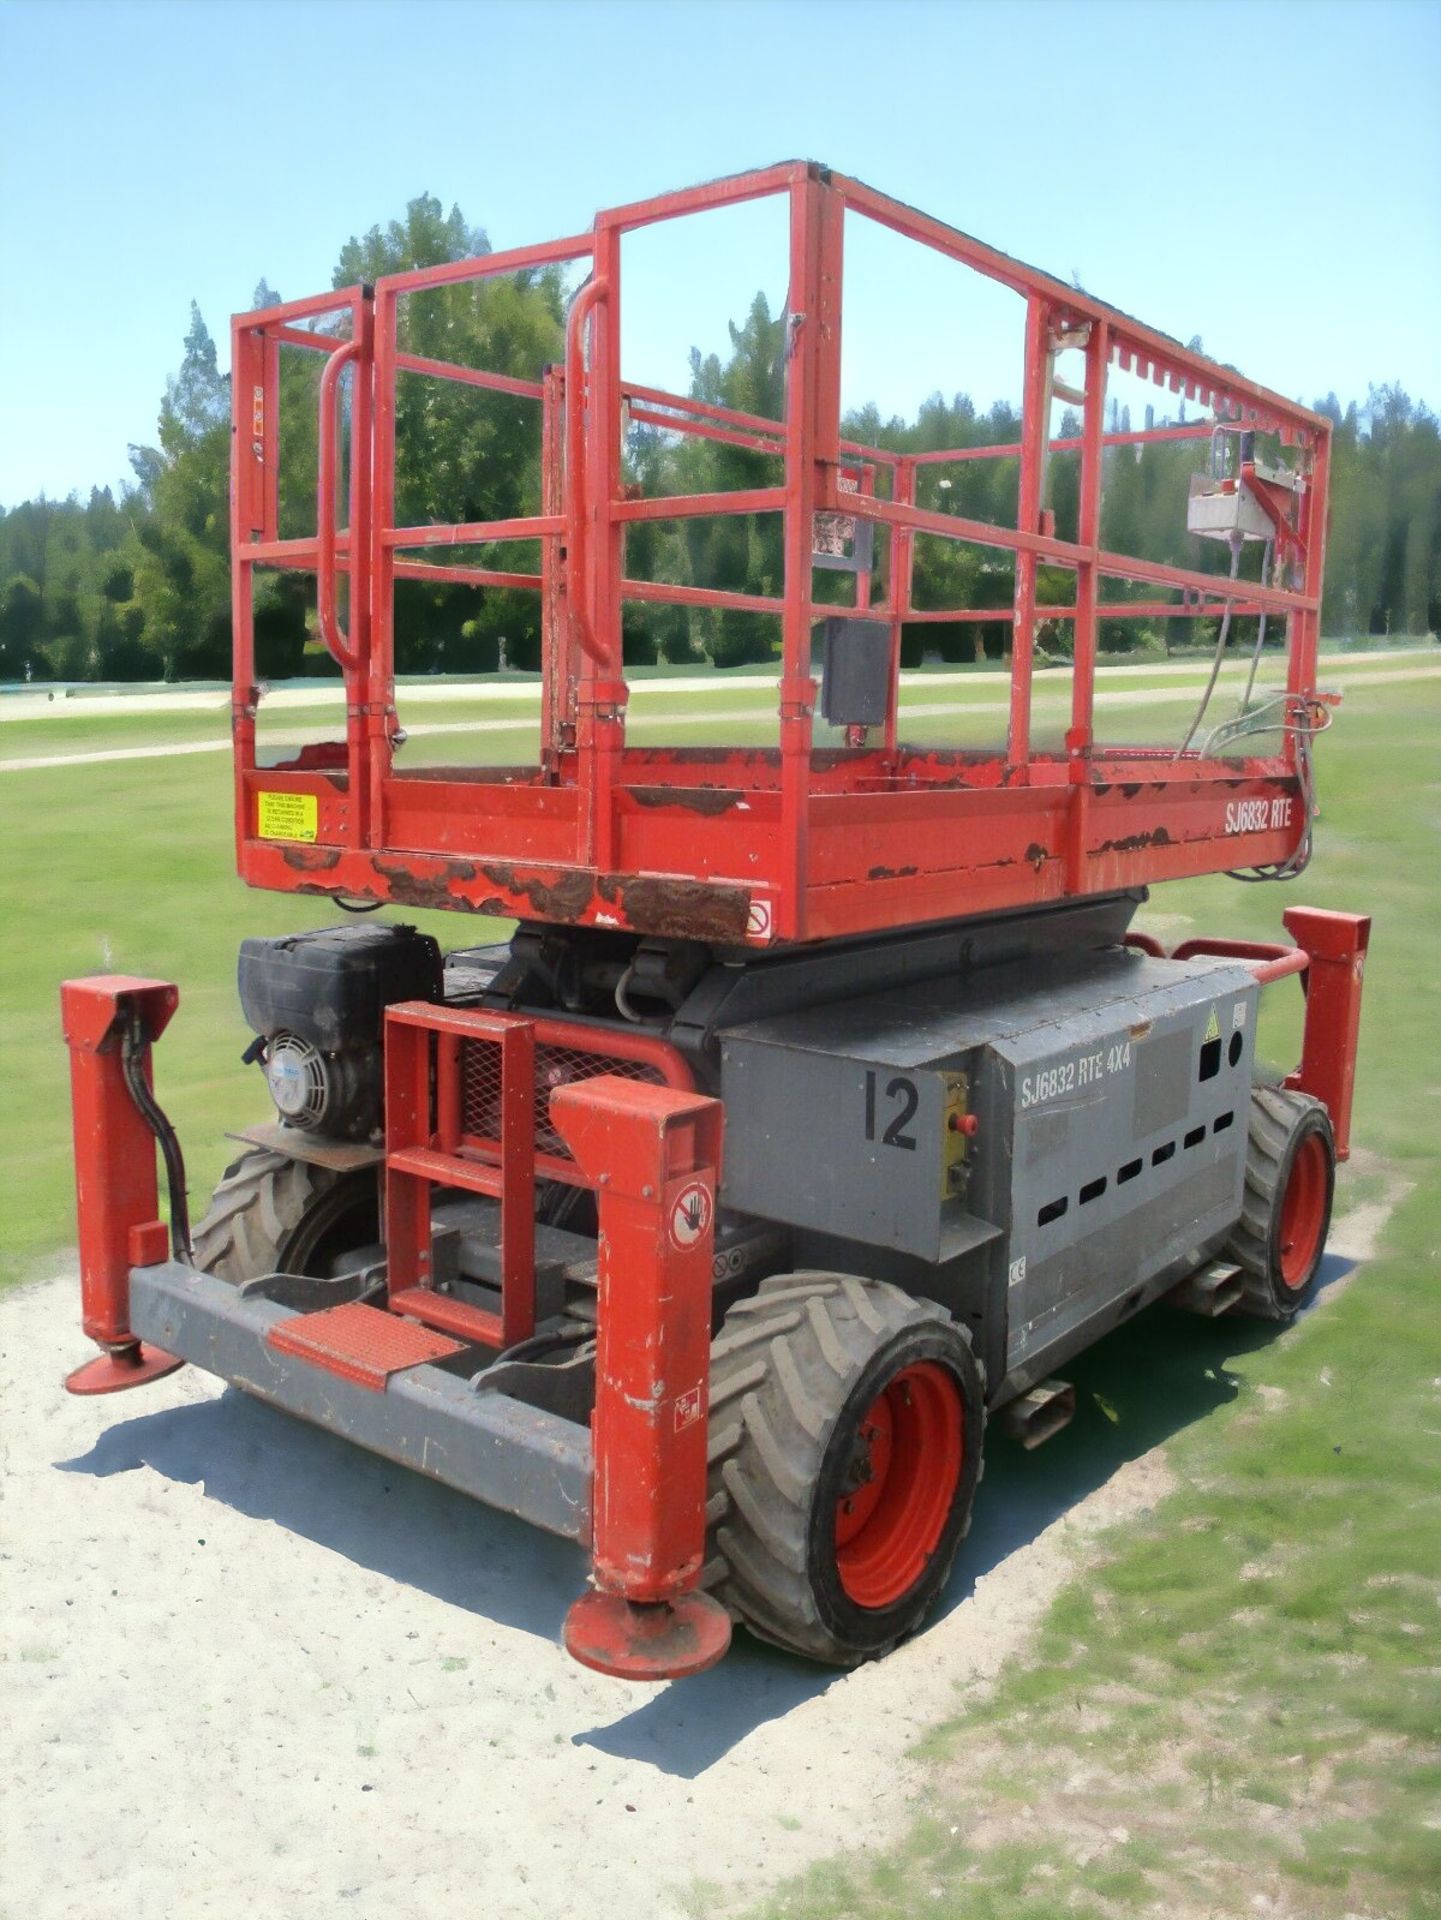 2014 SKYJACK SJ6832RTE SCISSOR LIFT - REACH NEW HEIGHTS WITH EFFICIENCY AND VERSATILITY - Image 12 of 15